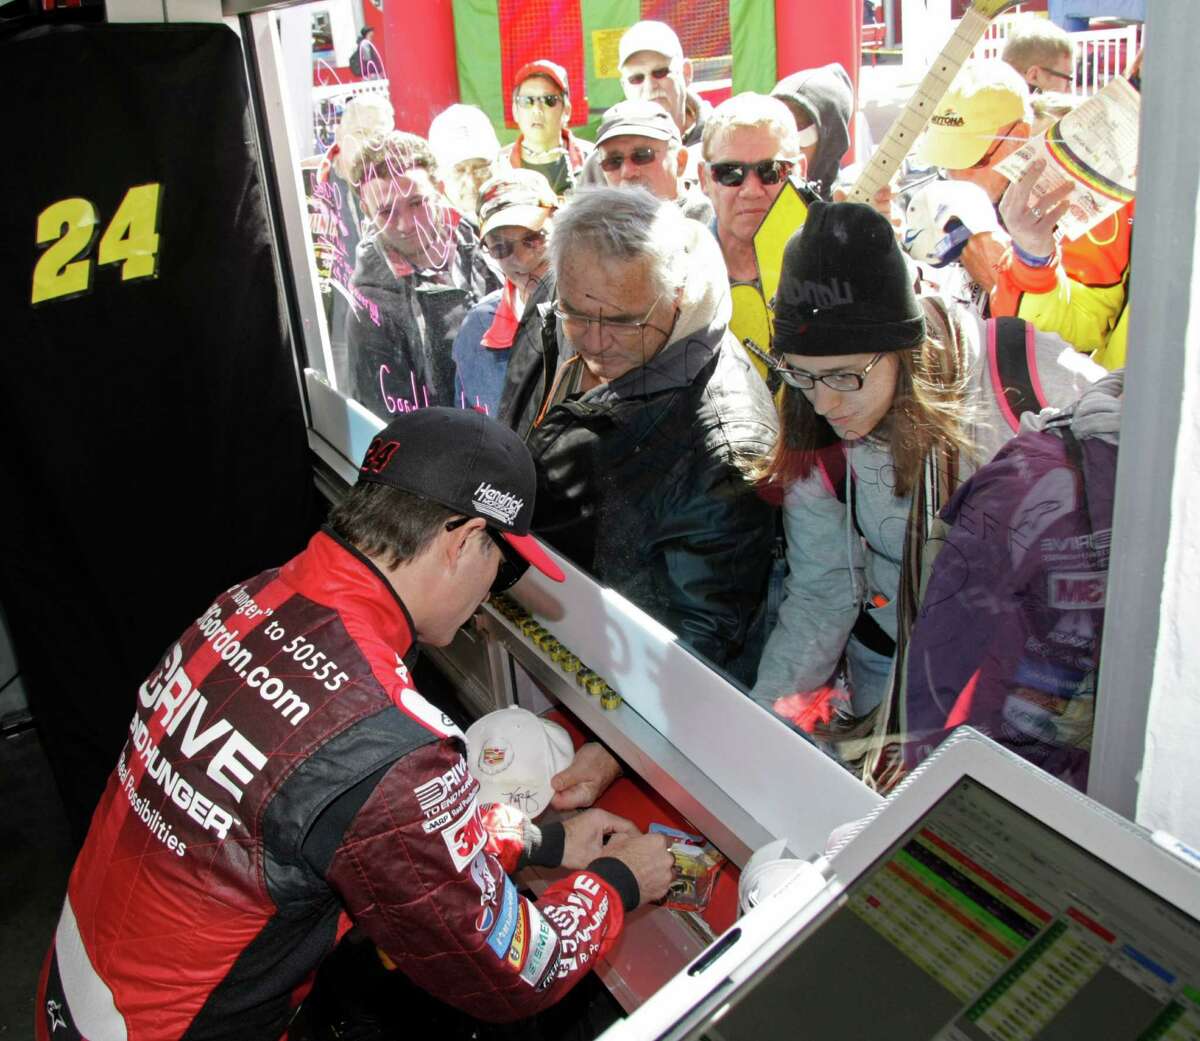 Jeff Gordon, a four-time NASCAR champ, was popular with autograph-seekers prior to his final Daytona 500.